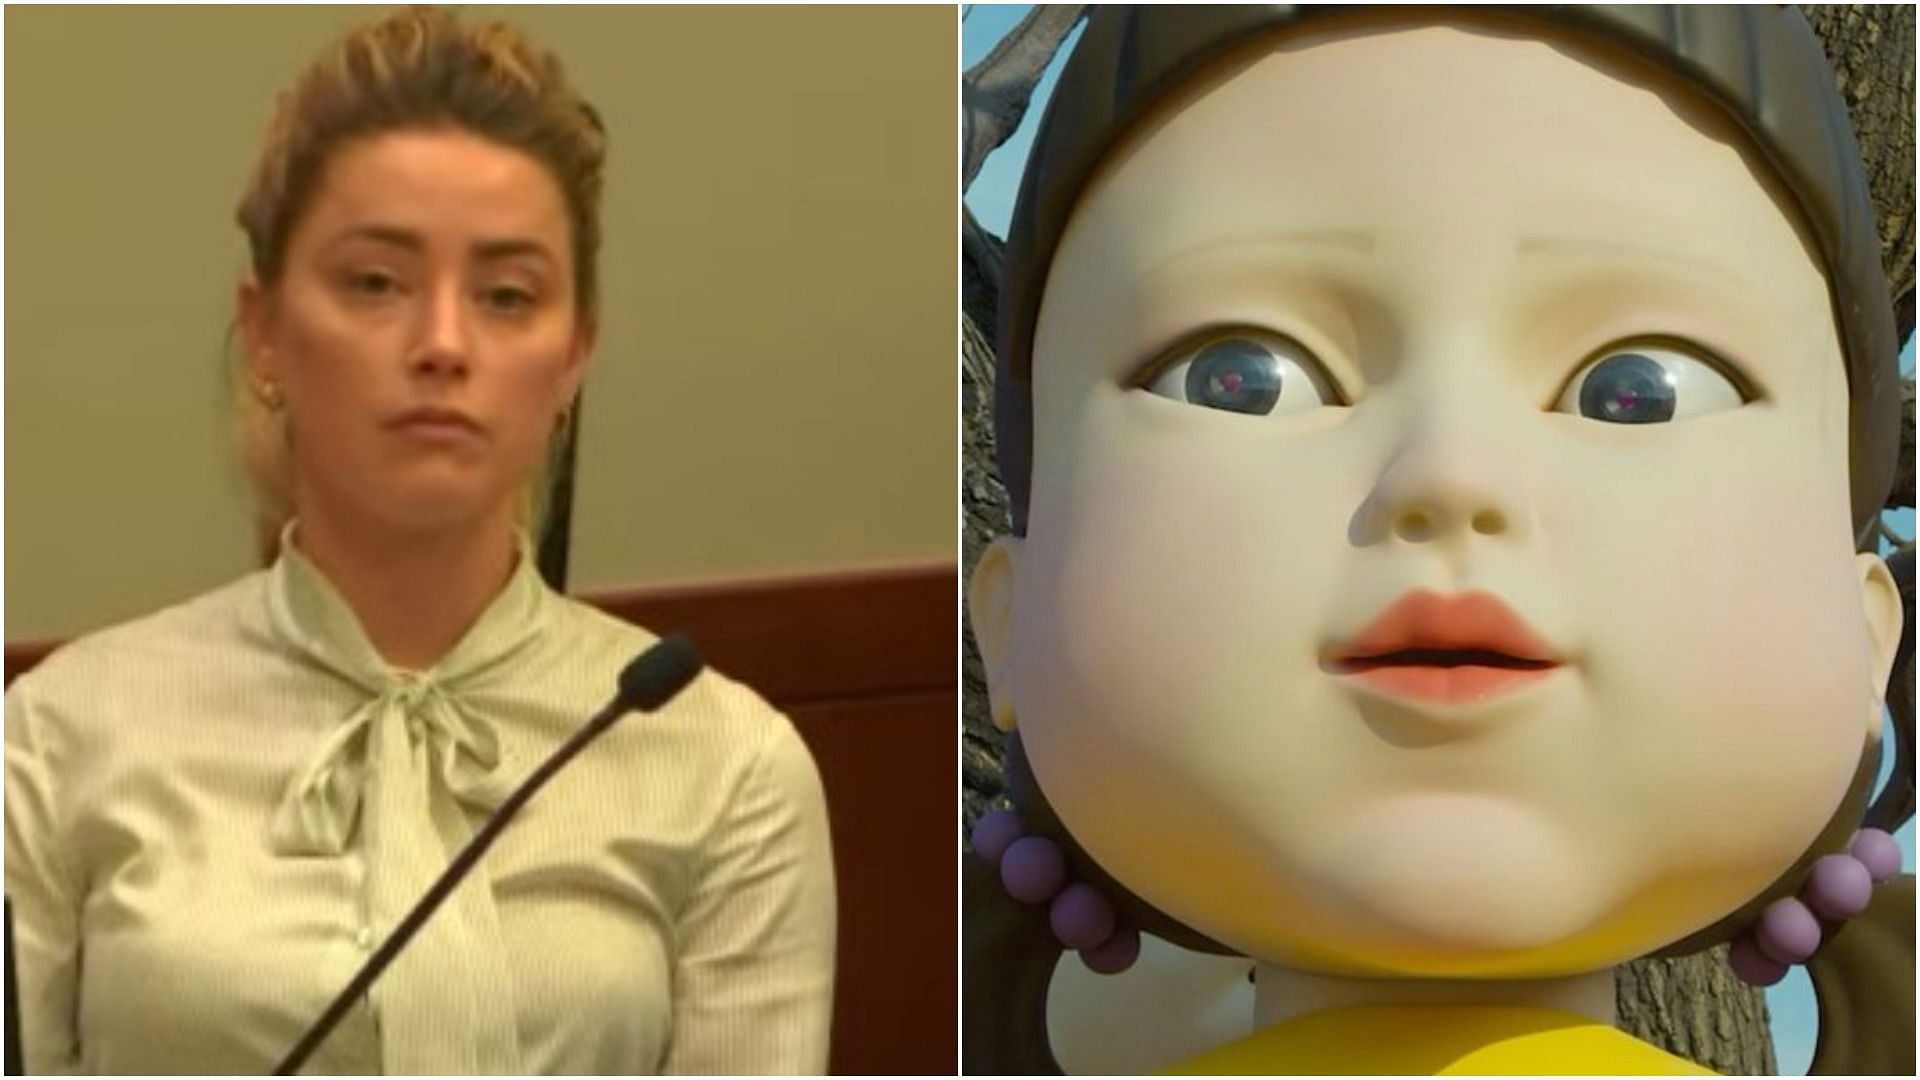 Amber Heard Squid Game meme trend takes over the internet ahead of Season 2 release(Image via @YouTube/Law &amp;Crime, and @squidgame/Instagram)